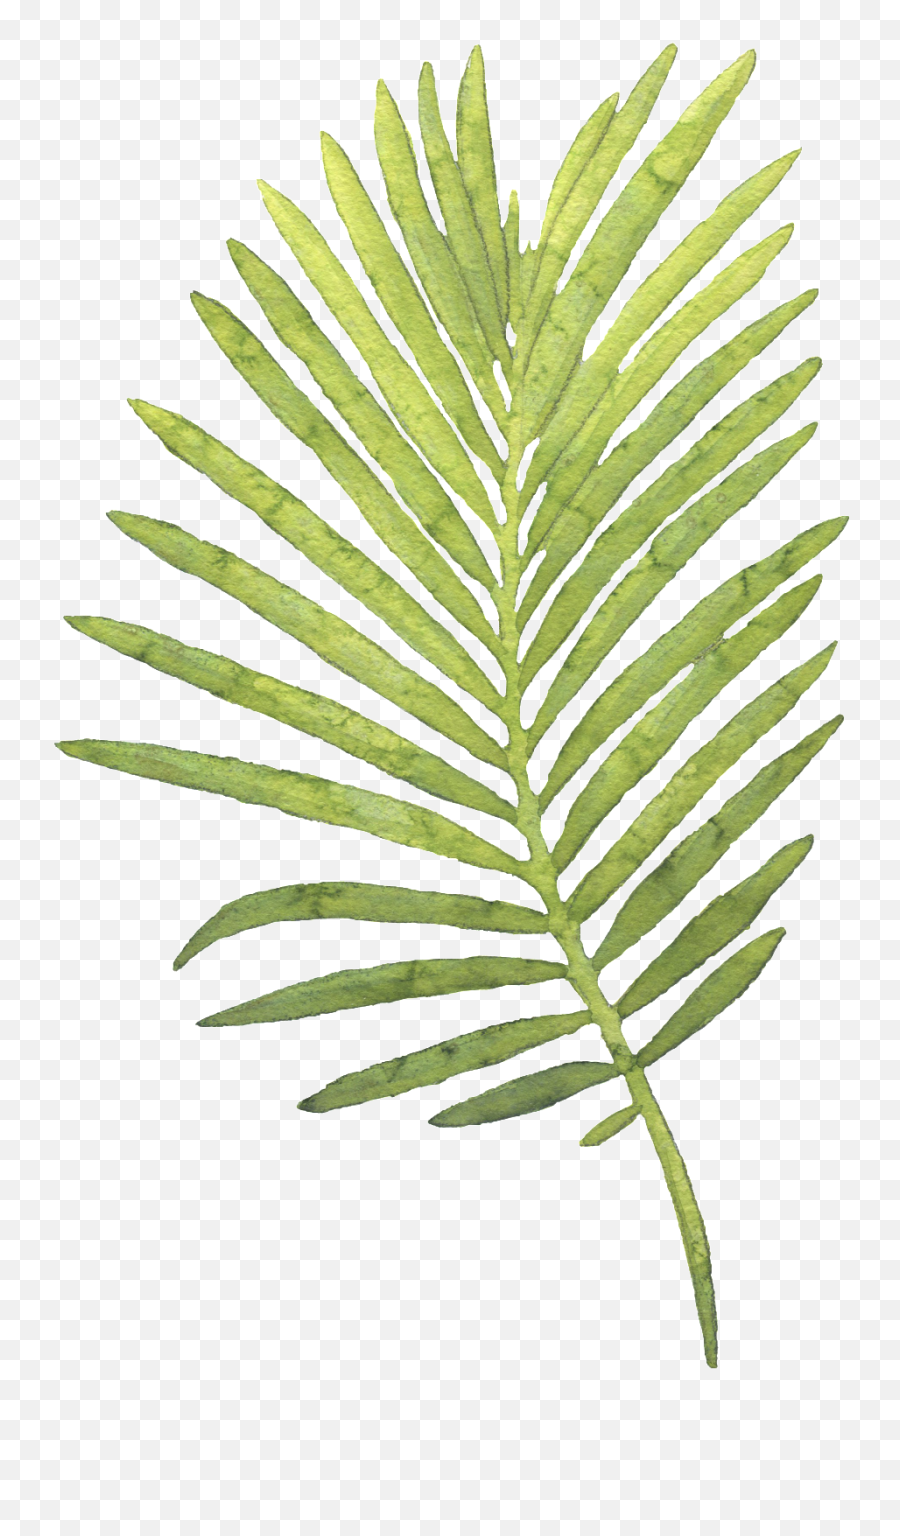 Watercolour Palm Leaf No Background - Watercolor Painting Emoji,Palm Leaves Png